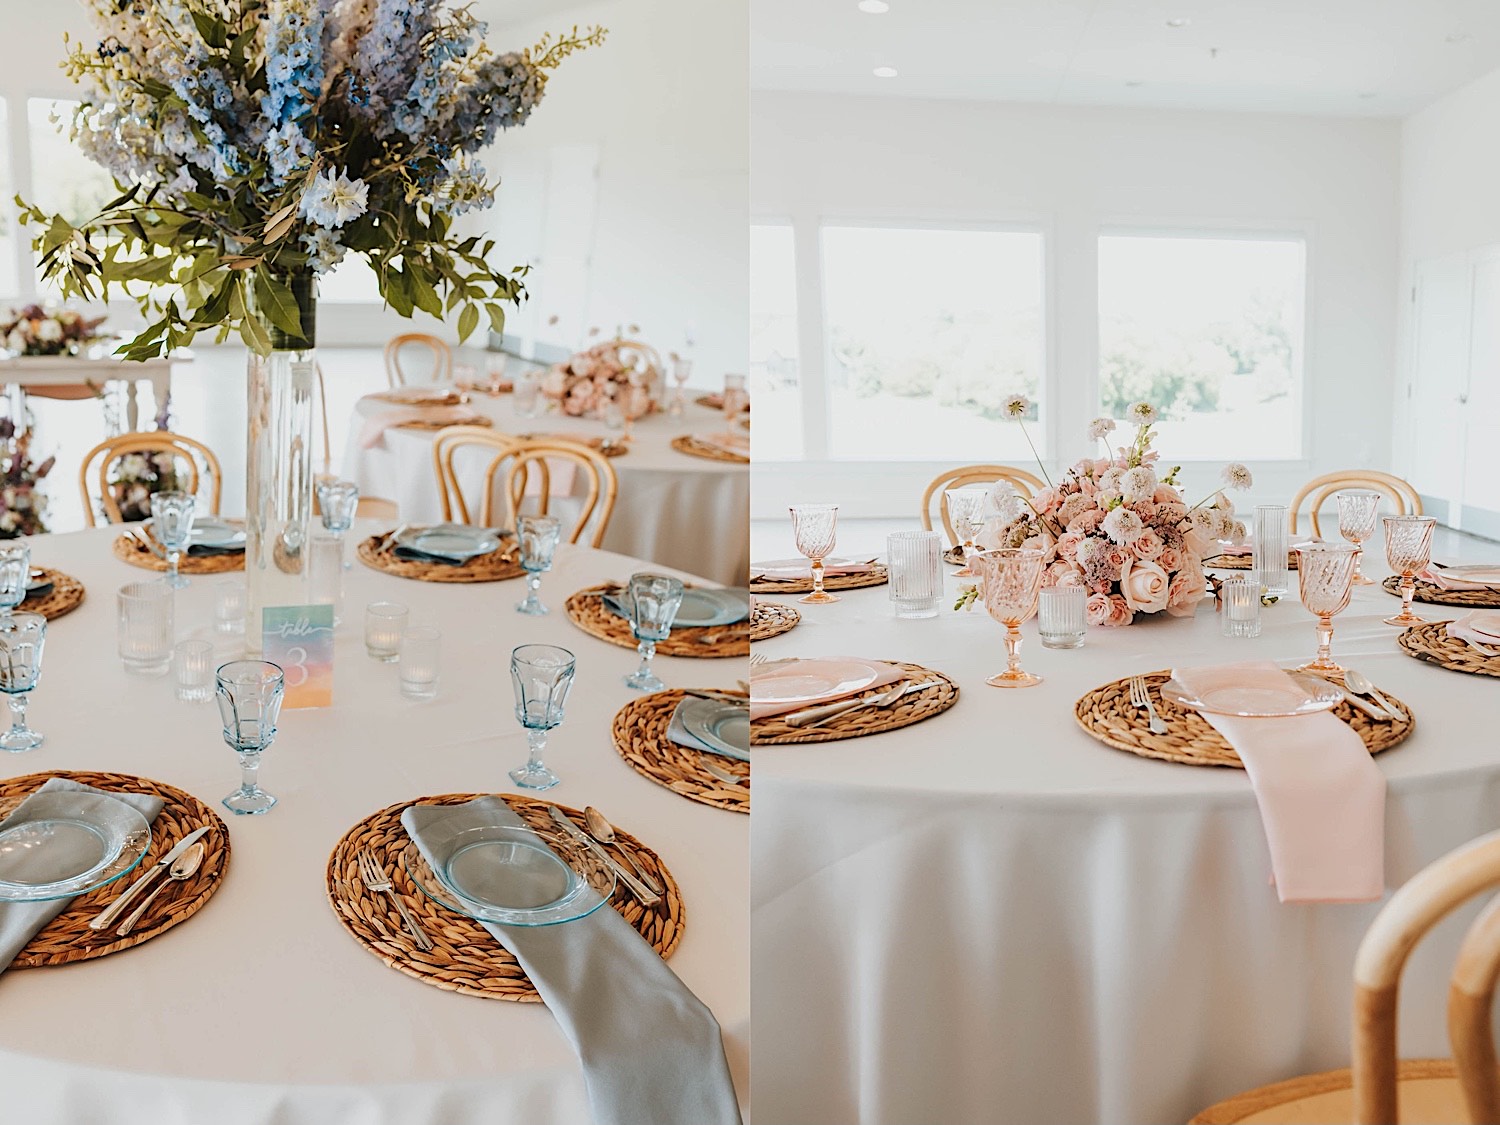 2 photos side by side, the left is of a table decorated with blue glassware for a wedding reception, the right is a table with pink glassware